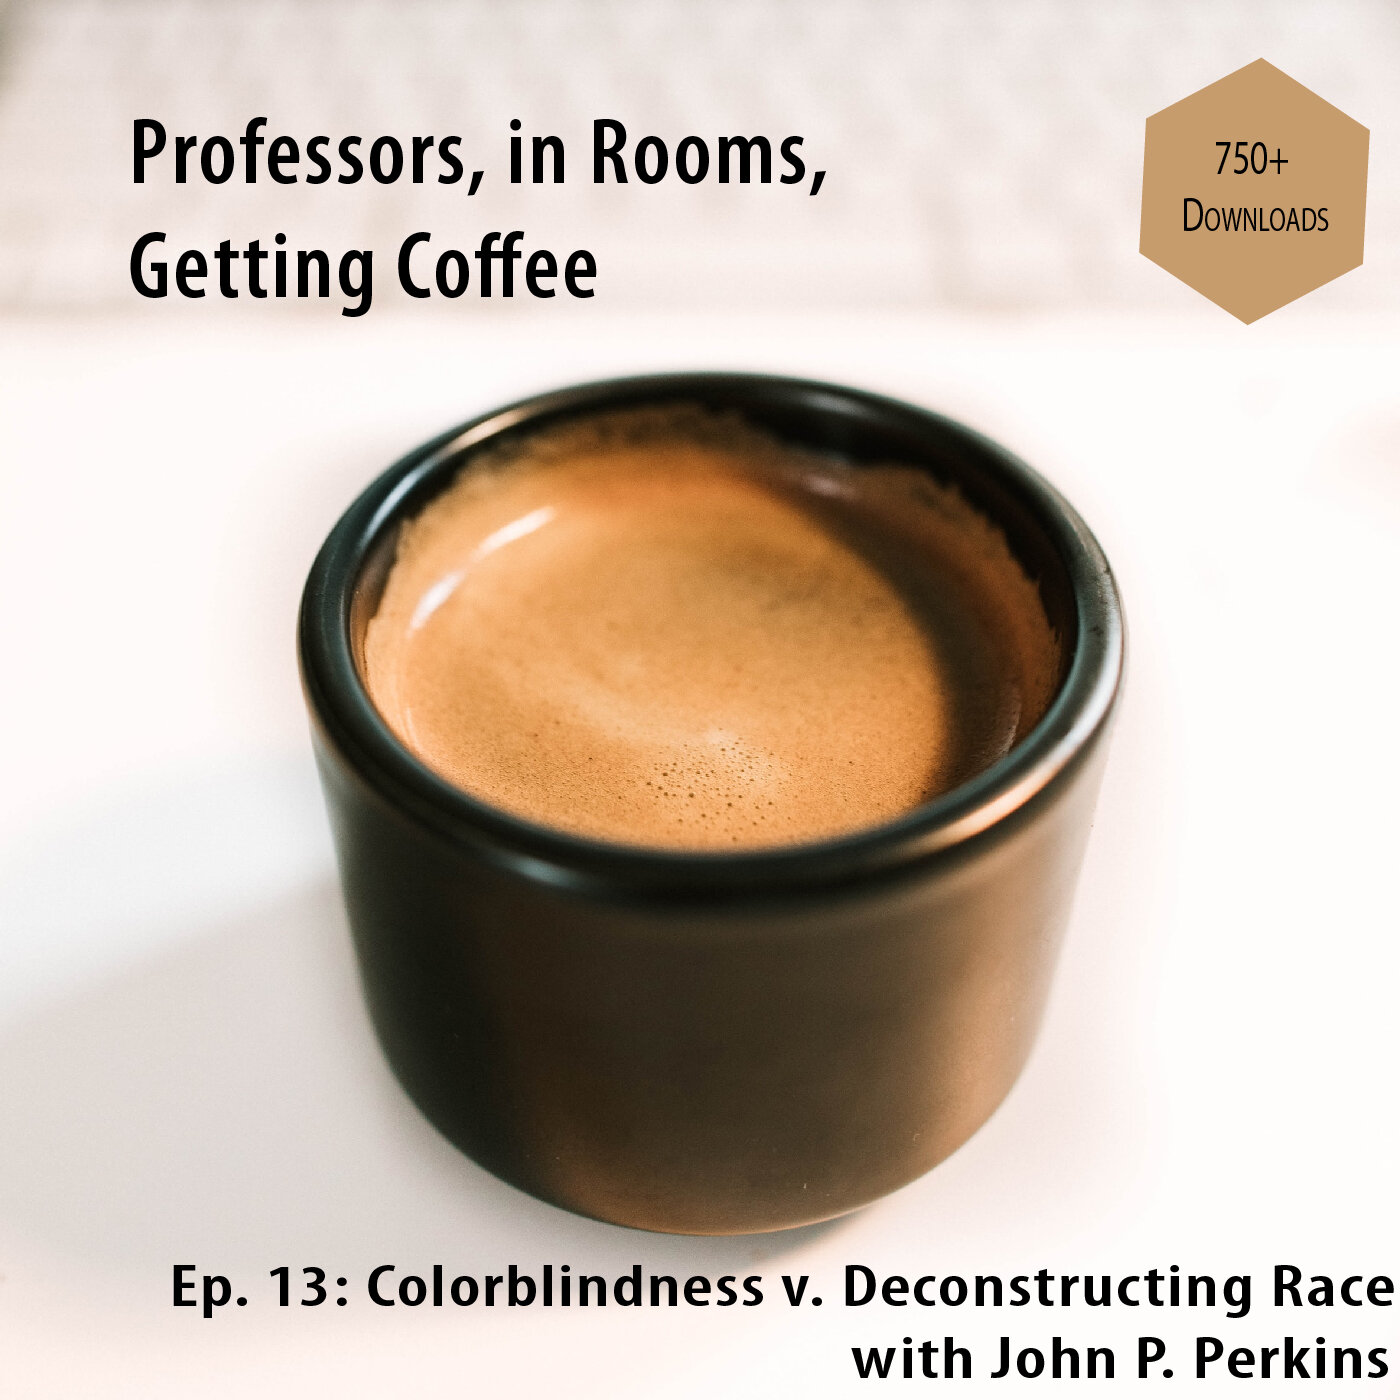 Colorblindness v. Deconstructing Race - with John P. Perkins(part 2)